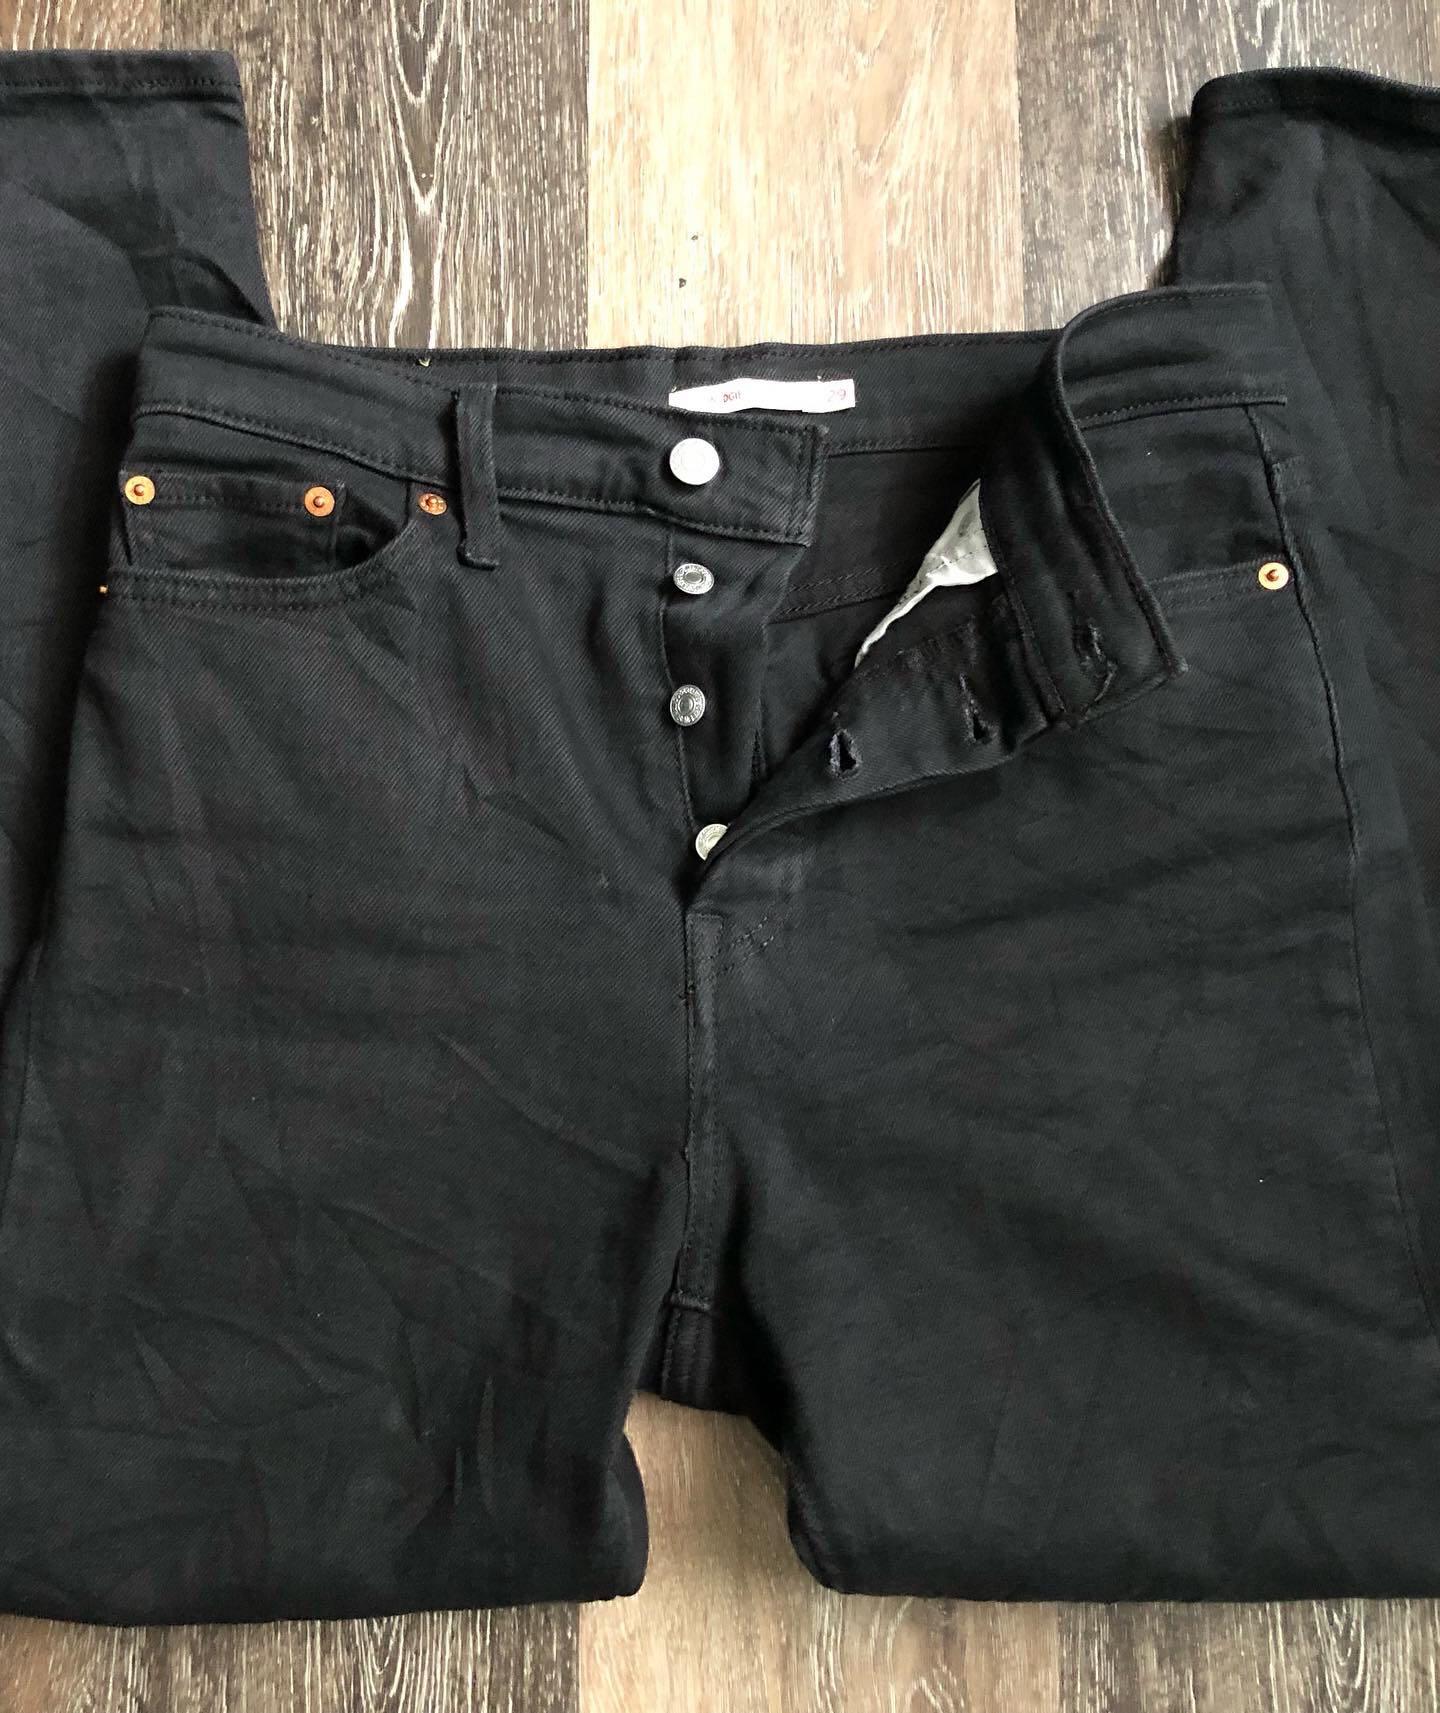 Buttonfly Levi's 501 Wedgie Skinny Fit W29 L27, Women's Fashion, Bottoms,  Jeans on Carousell